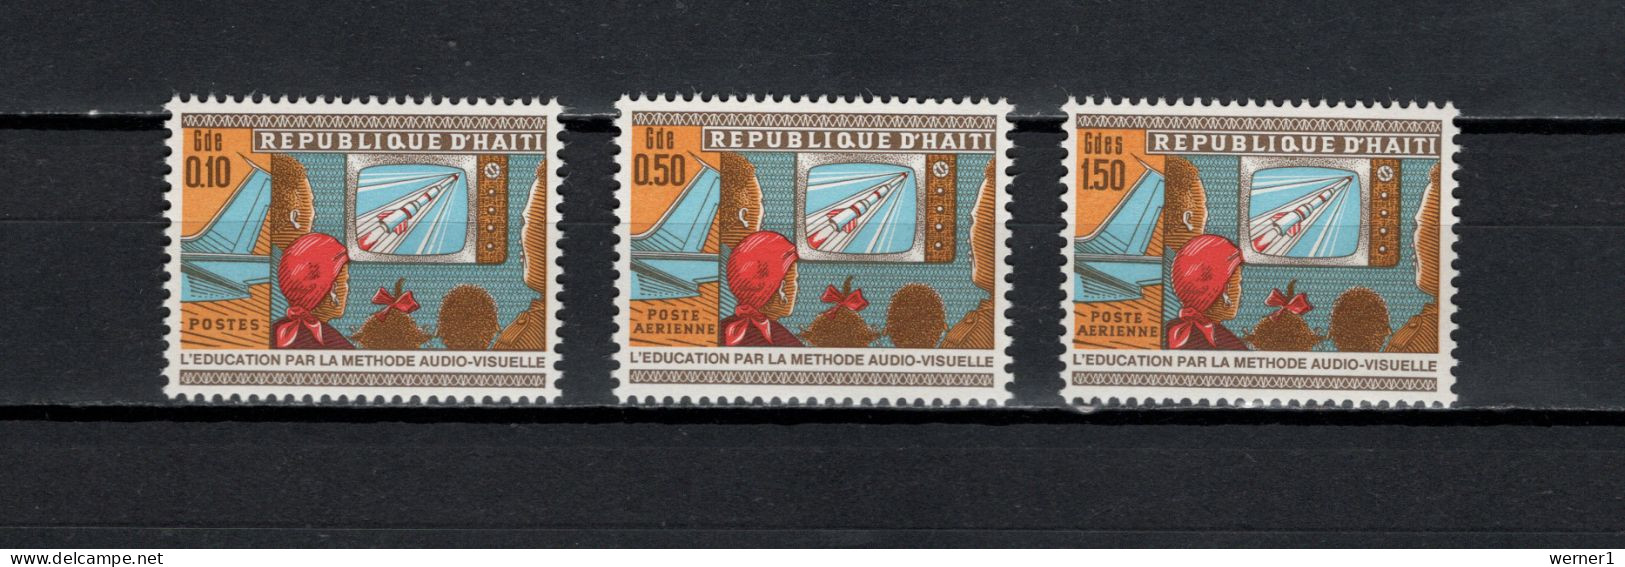 Haiti 1968 Space Education 3 Stamps MNH - North  America